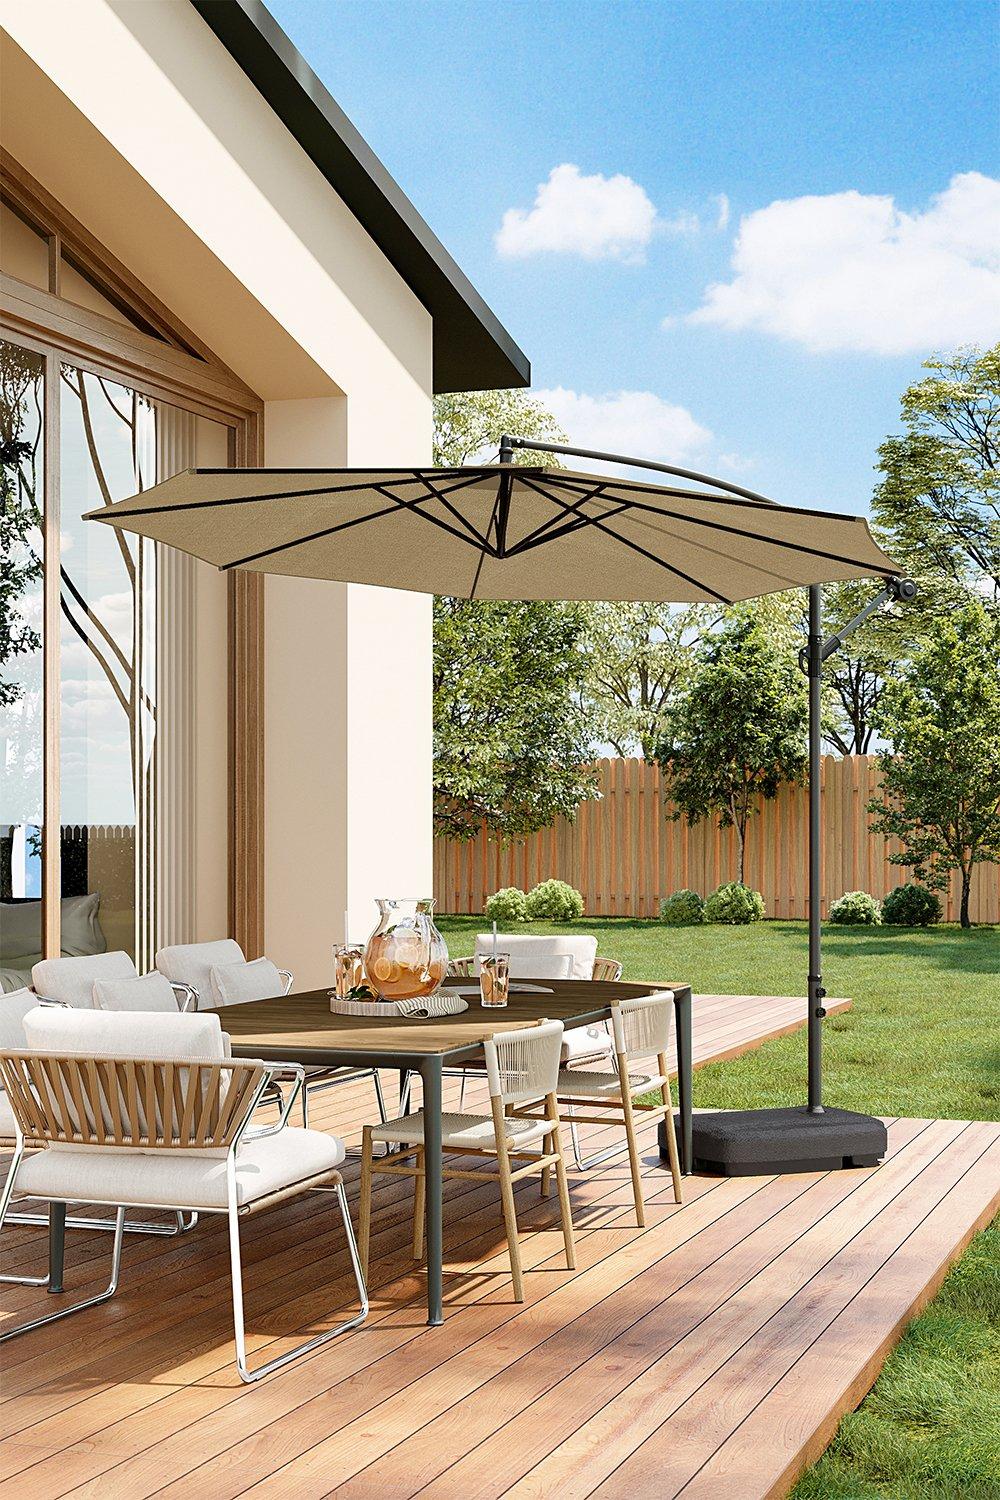 Outdoor Large 3M Cantilever Parasol with Fillable Base